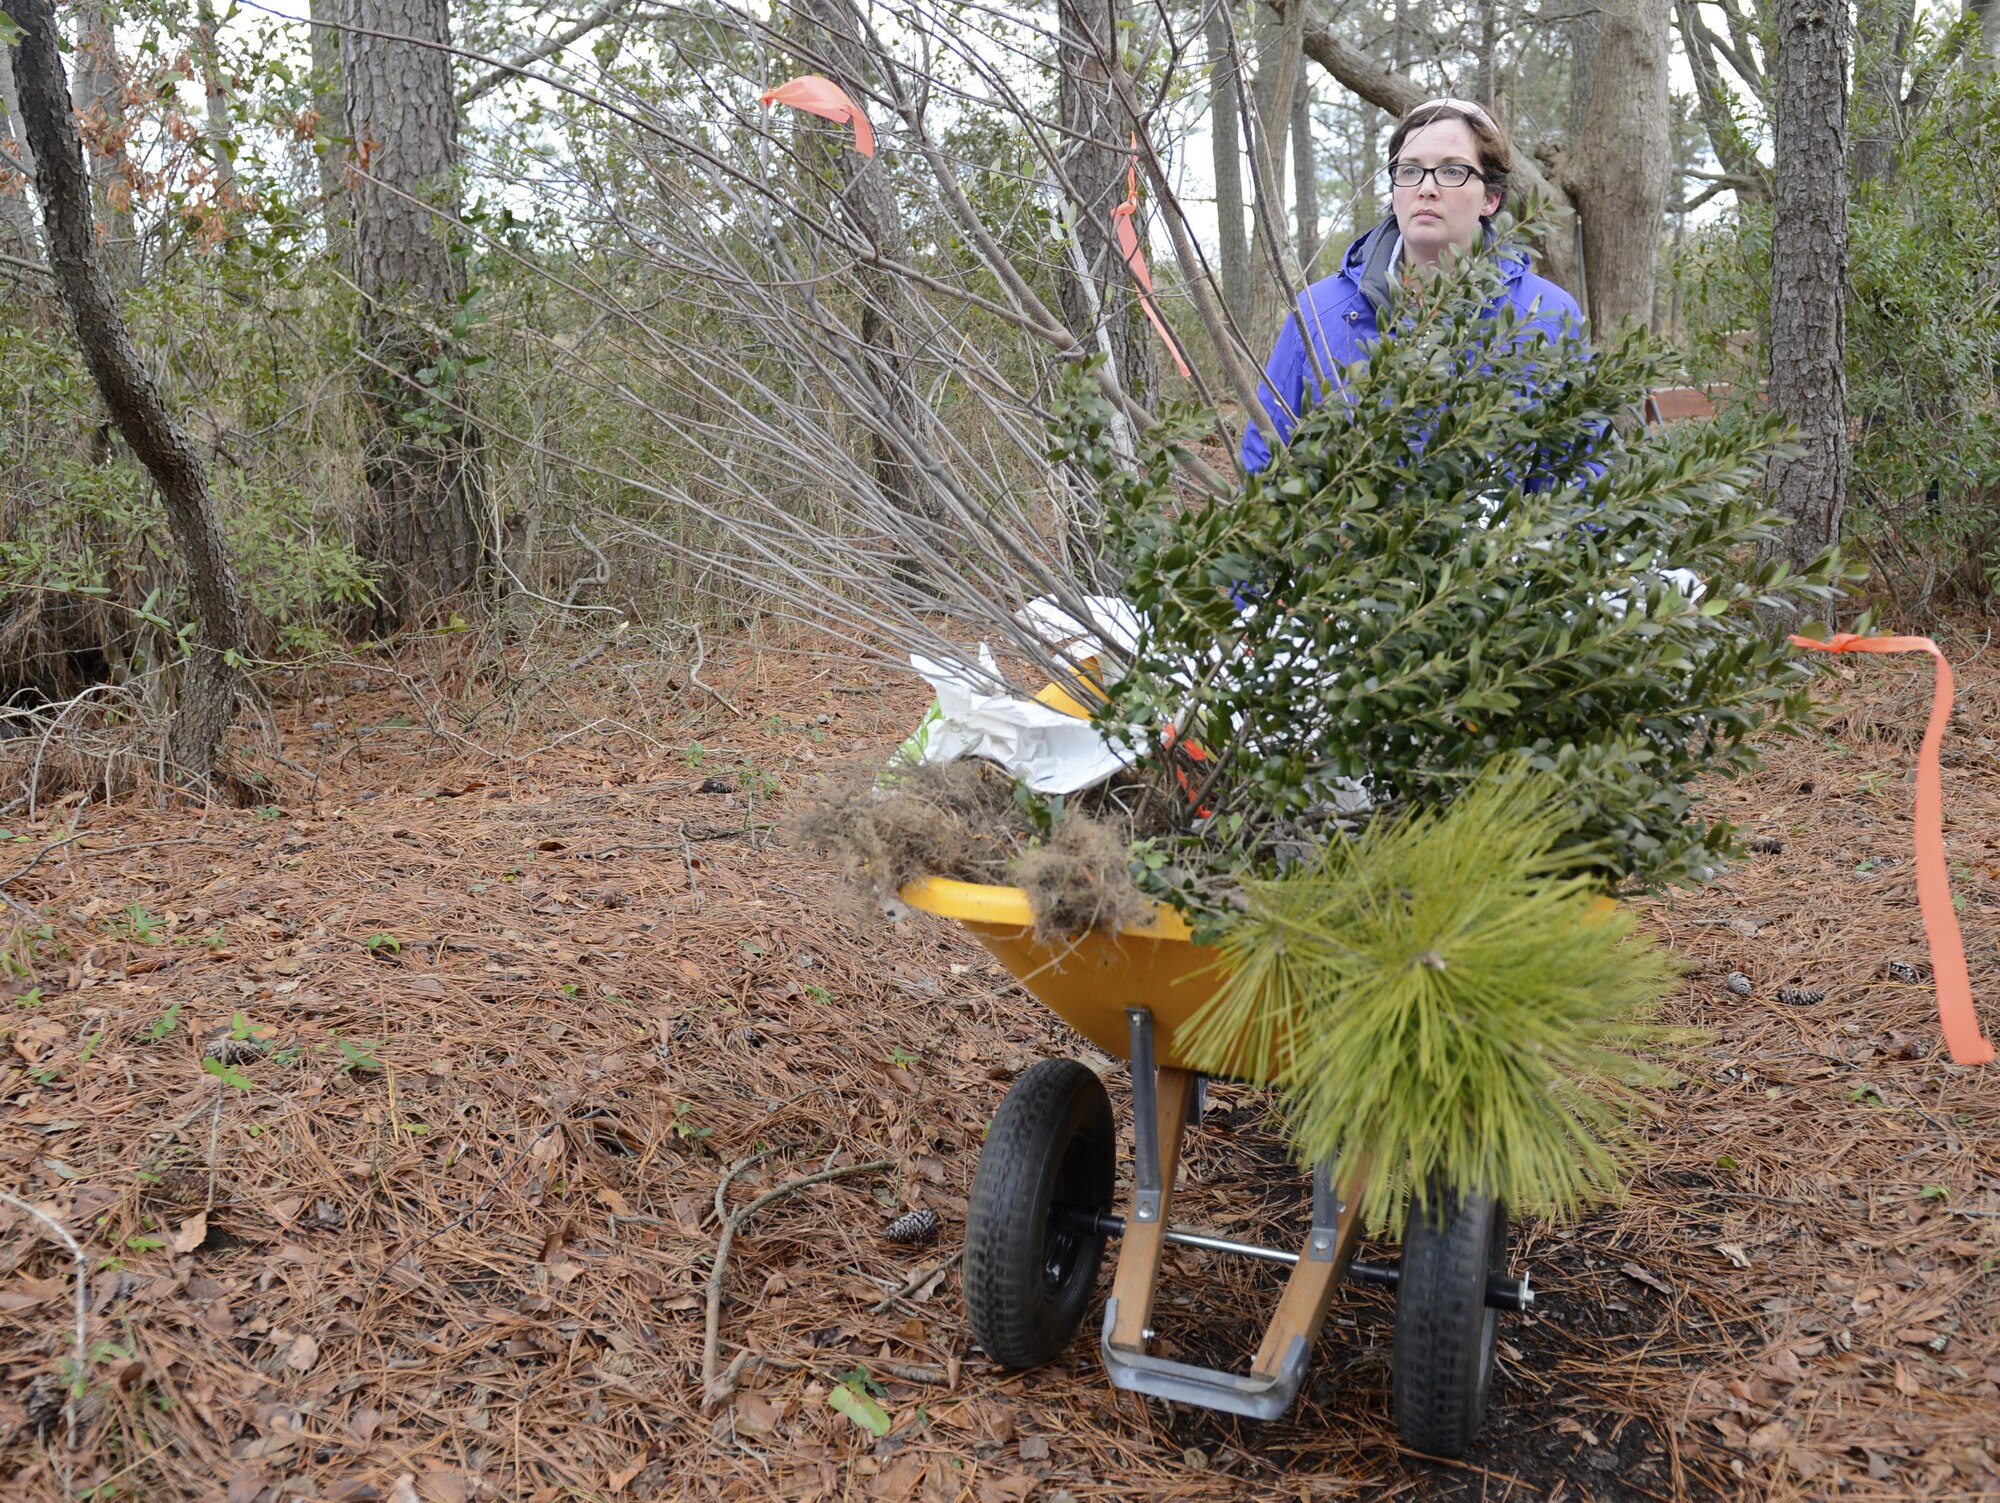 Alicia Garcia, 633rd Civil Engineer Squadron natural resources program manager, transfers pollinator plants from Bethel Park Garden to the nature trail during a volunteer event at Joint Base Langley-Eustis, Va., Jan. 6, 2017. Relocating the plants will allow better utilization by pollinator species, such as birds and butterflies. (U.S. Air Force photo by Airman 1st Class Kaylee Dubois)